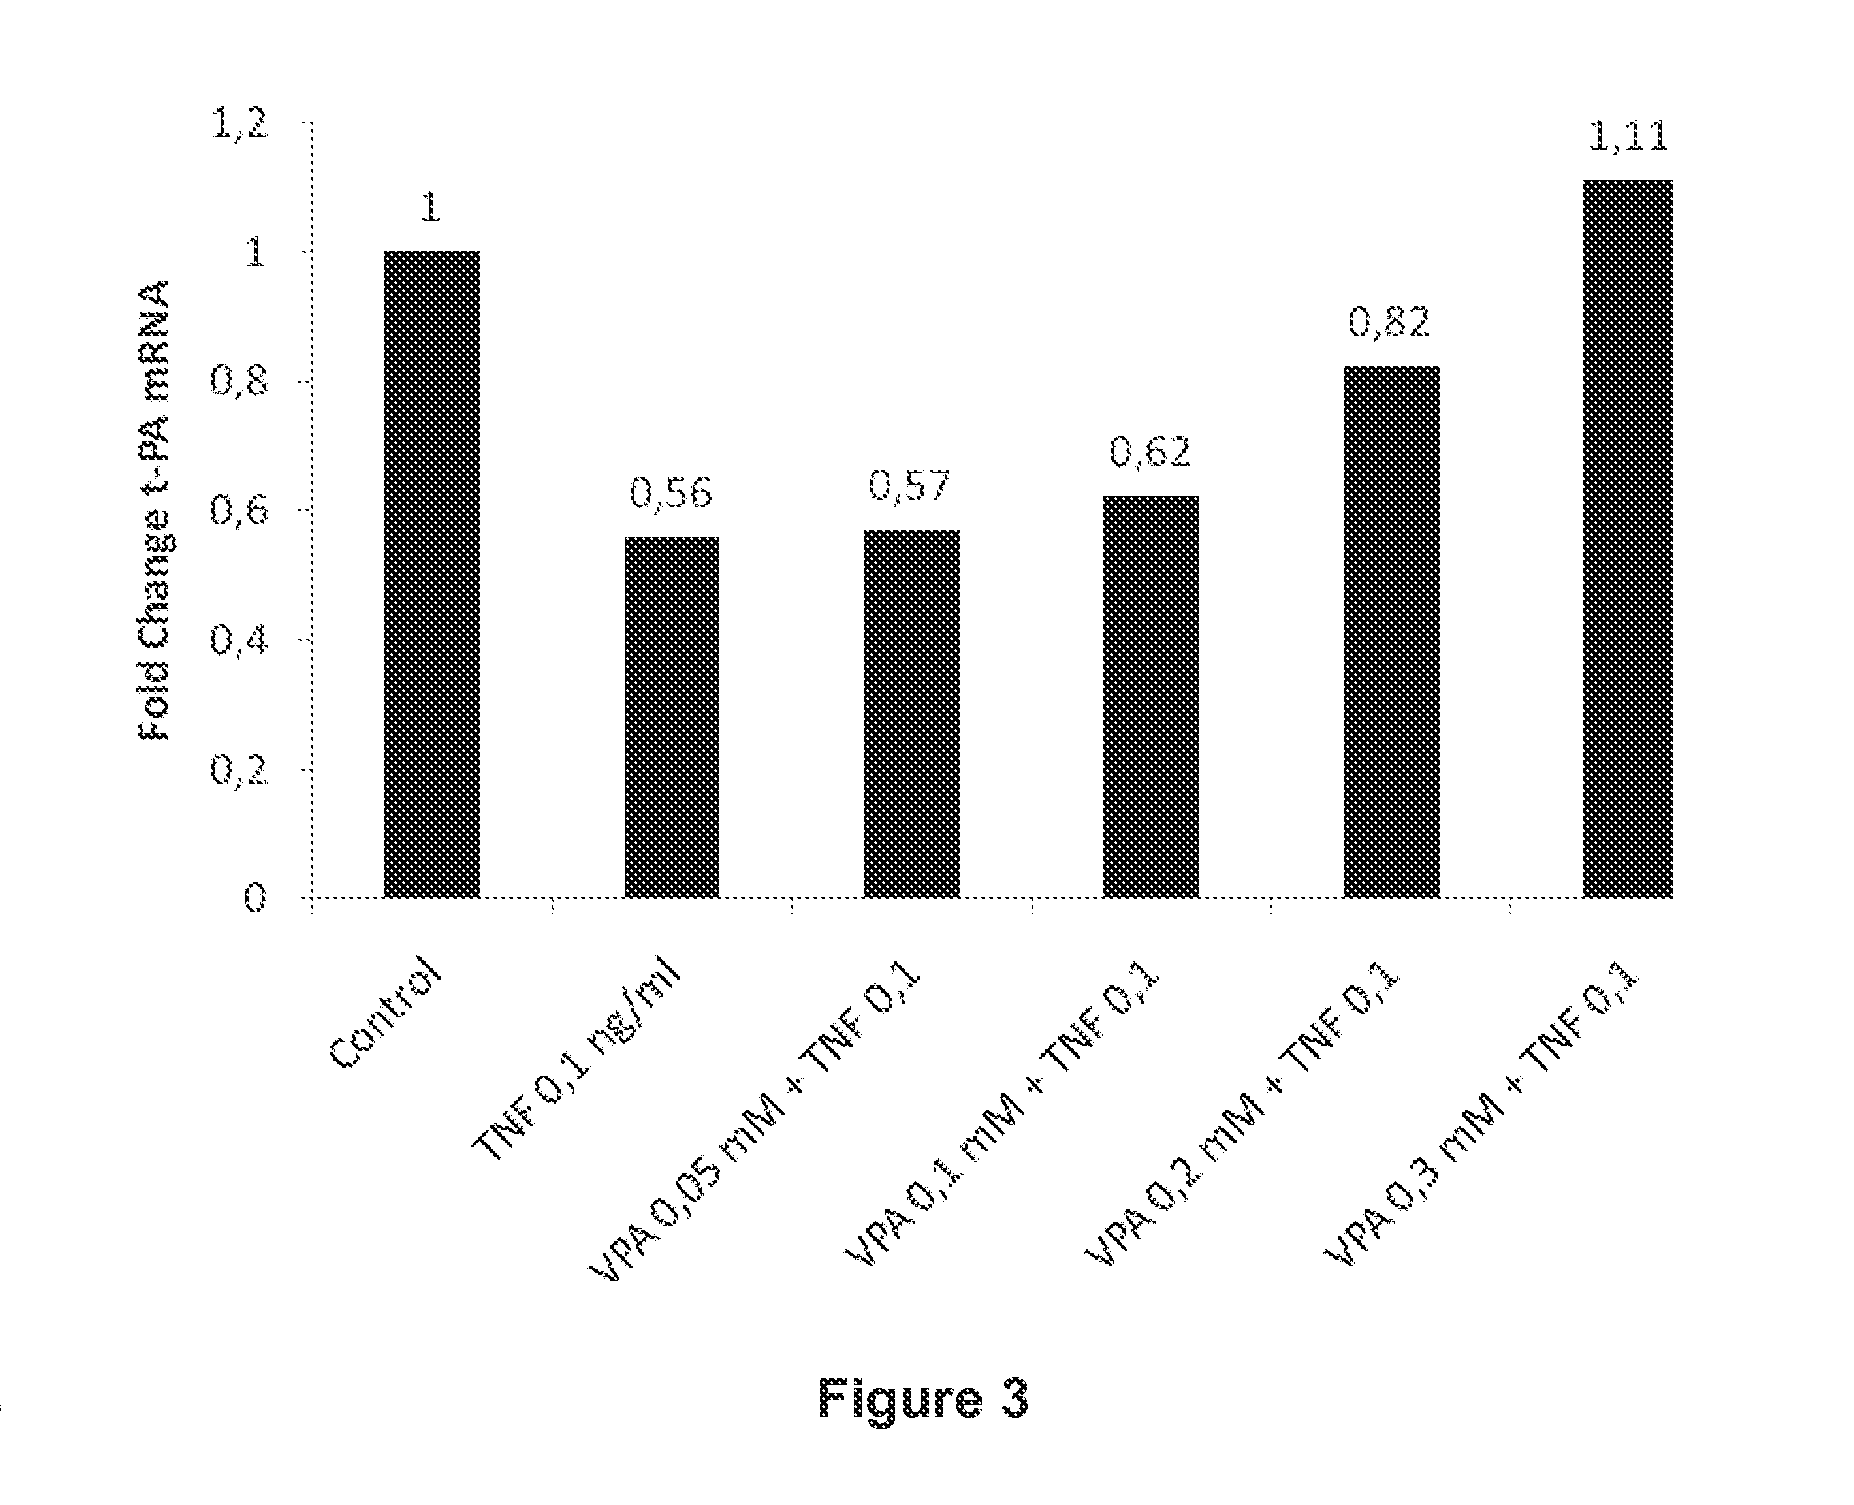 Compounds and methods for improving impaired endogenous fibrinolysis using histone deacetylase inhibitors